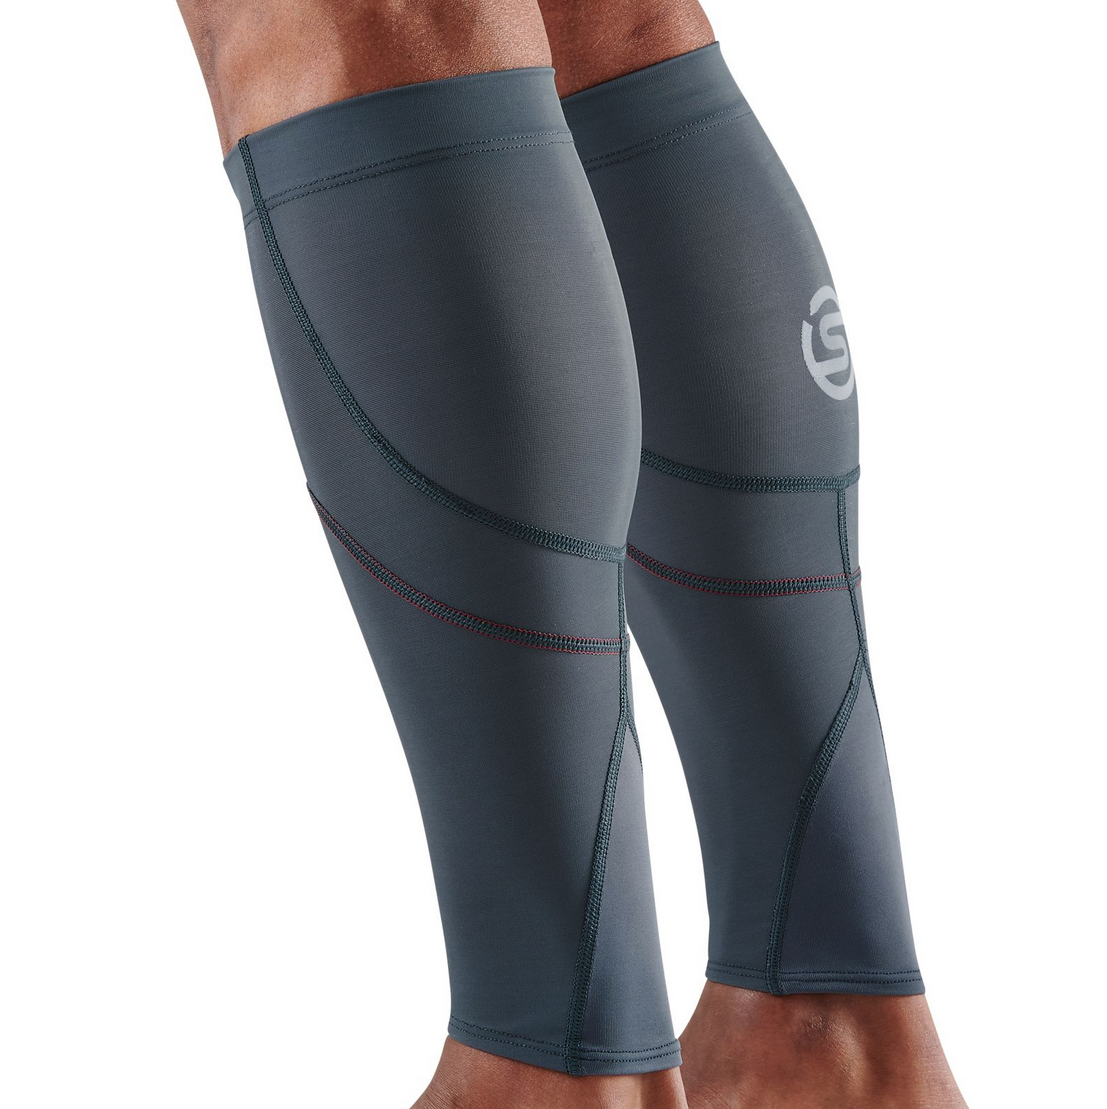 SKINS - Have you got everything you need for the rugby season?? Half tights  and calf tights? More and more professional rugby players are wearing SKINS  calf tights in trainings & games